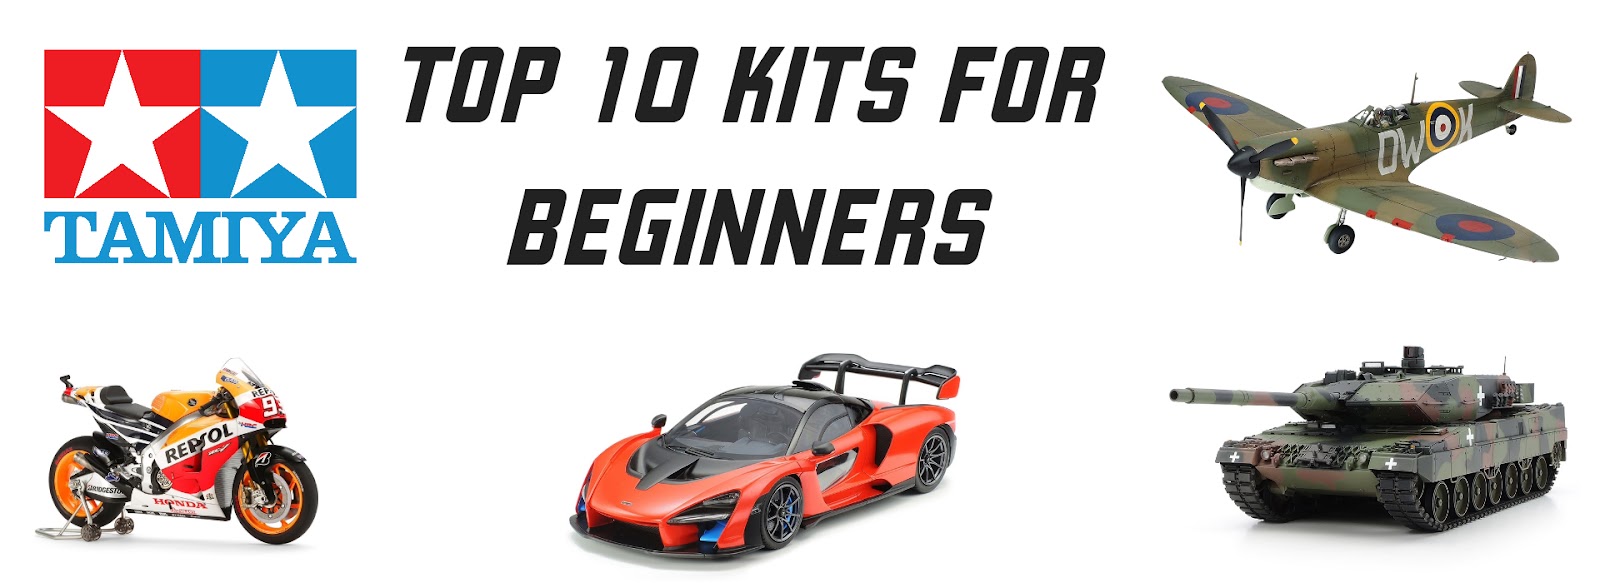 Banner showing Top 10 Tamiya Model Kits for Beginners